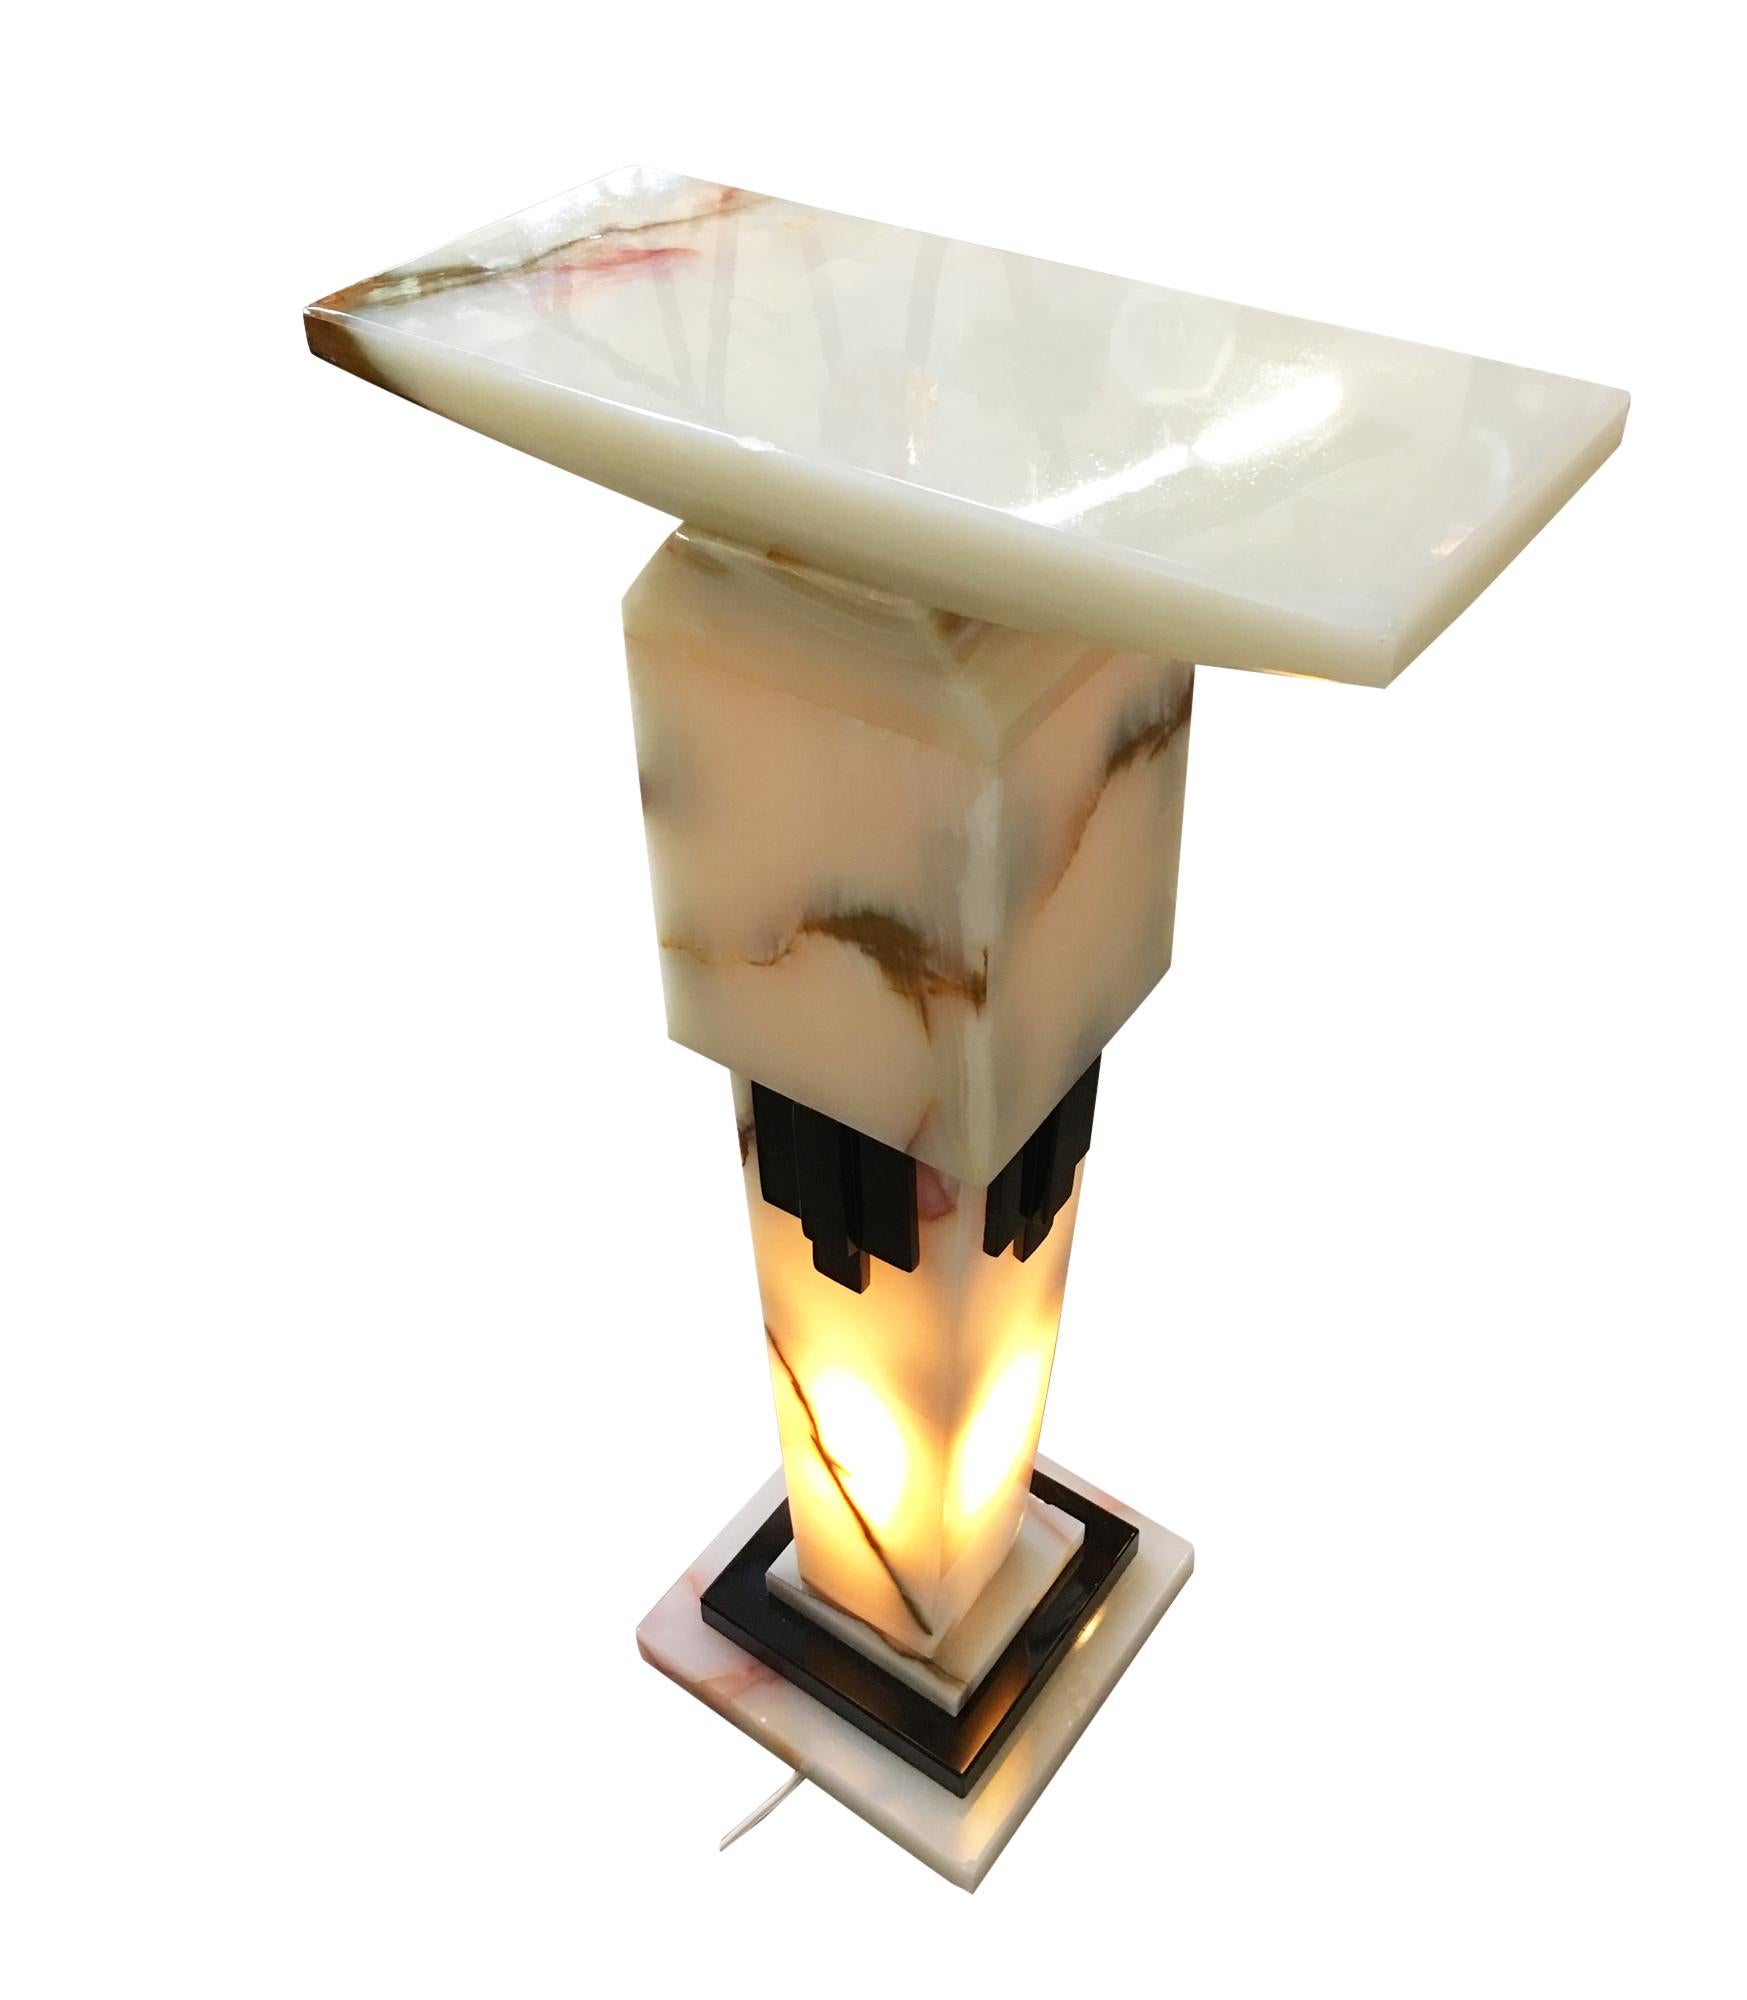 Fine quality re-edition marble and bronze pedestal in the style of Chiparus featuring a white onyx marble pedestal with black marble accents with a stepped design. Front and center of the stand is a plaque applique made of bronze with two nude